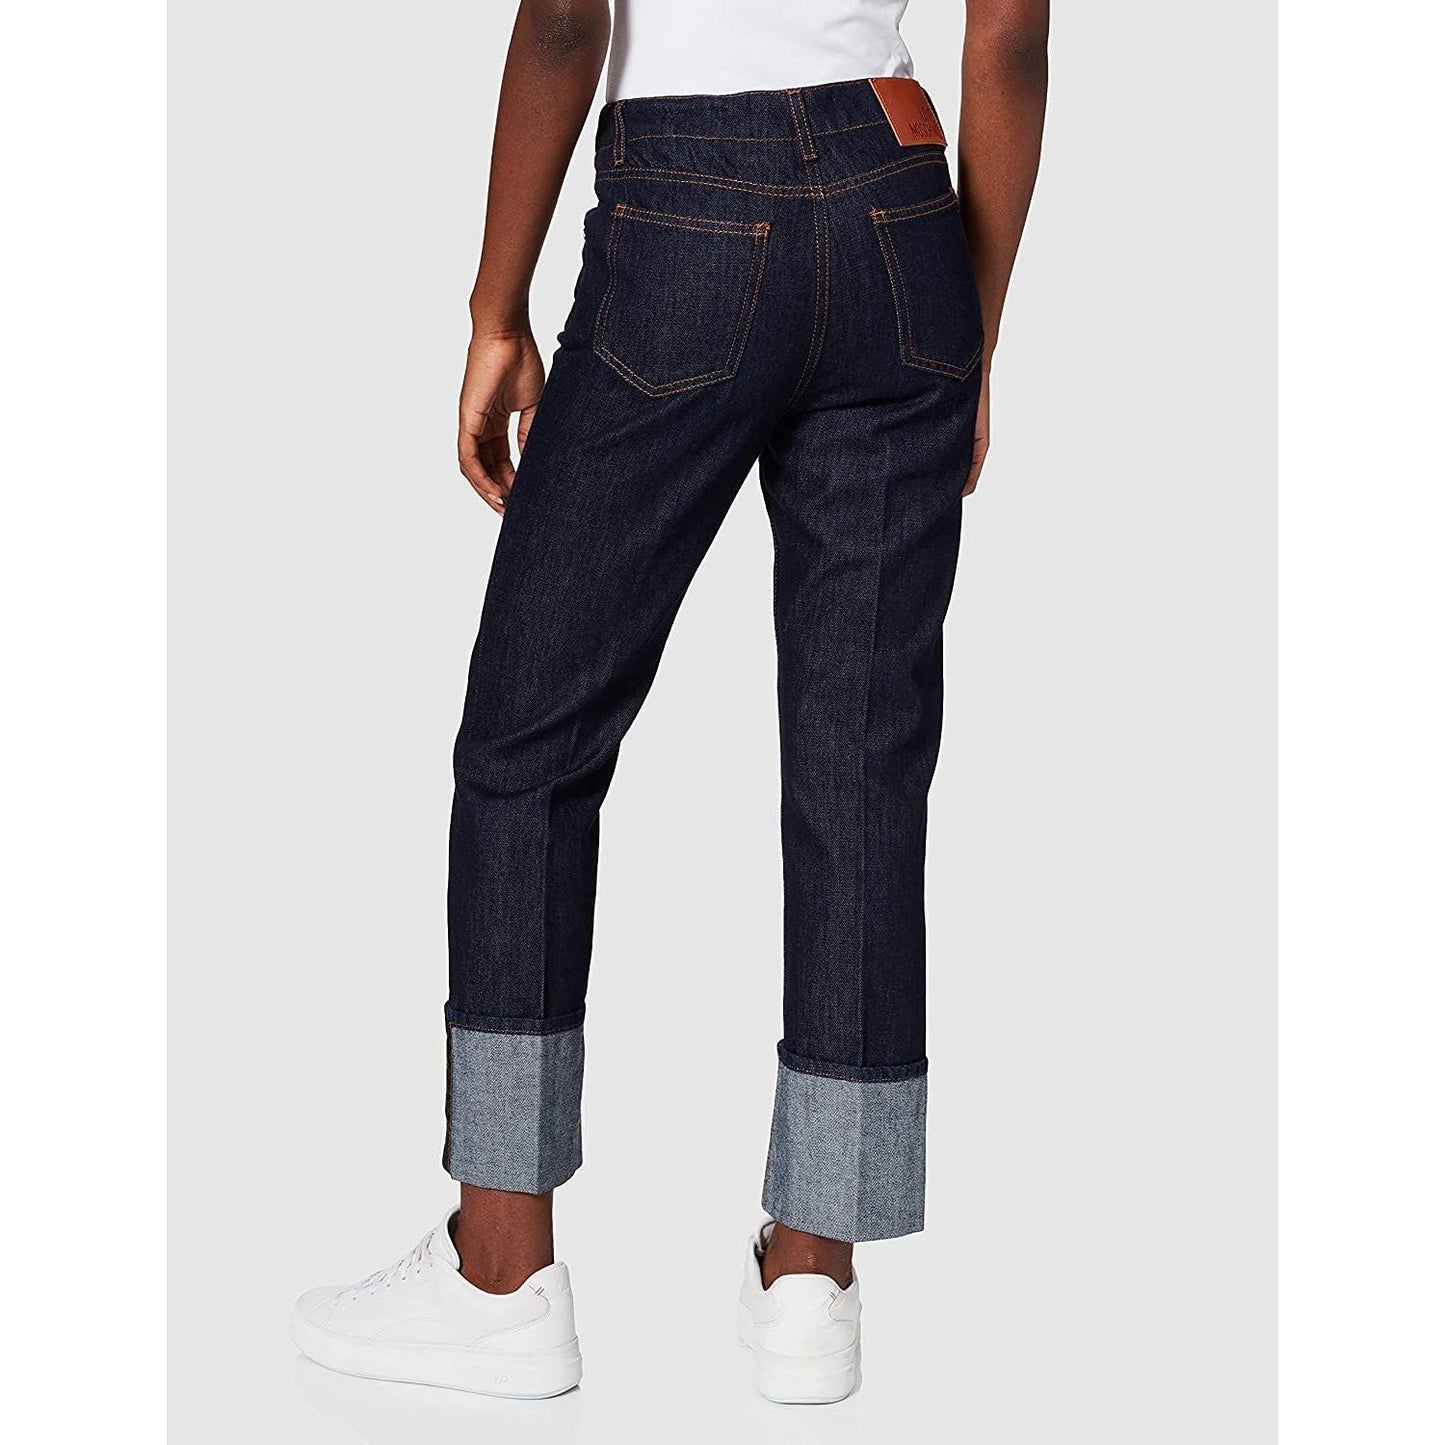 Love Moschino Chic Cotton Denim Jeans with Fleece Accent chic-cotton-denim-jeans-with-fleece-accent